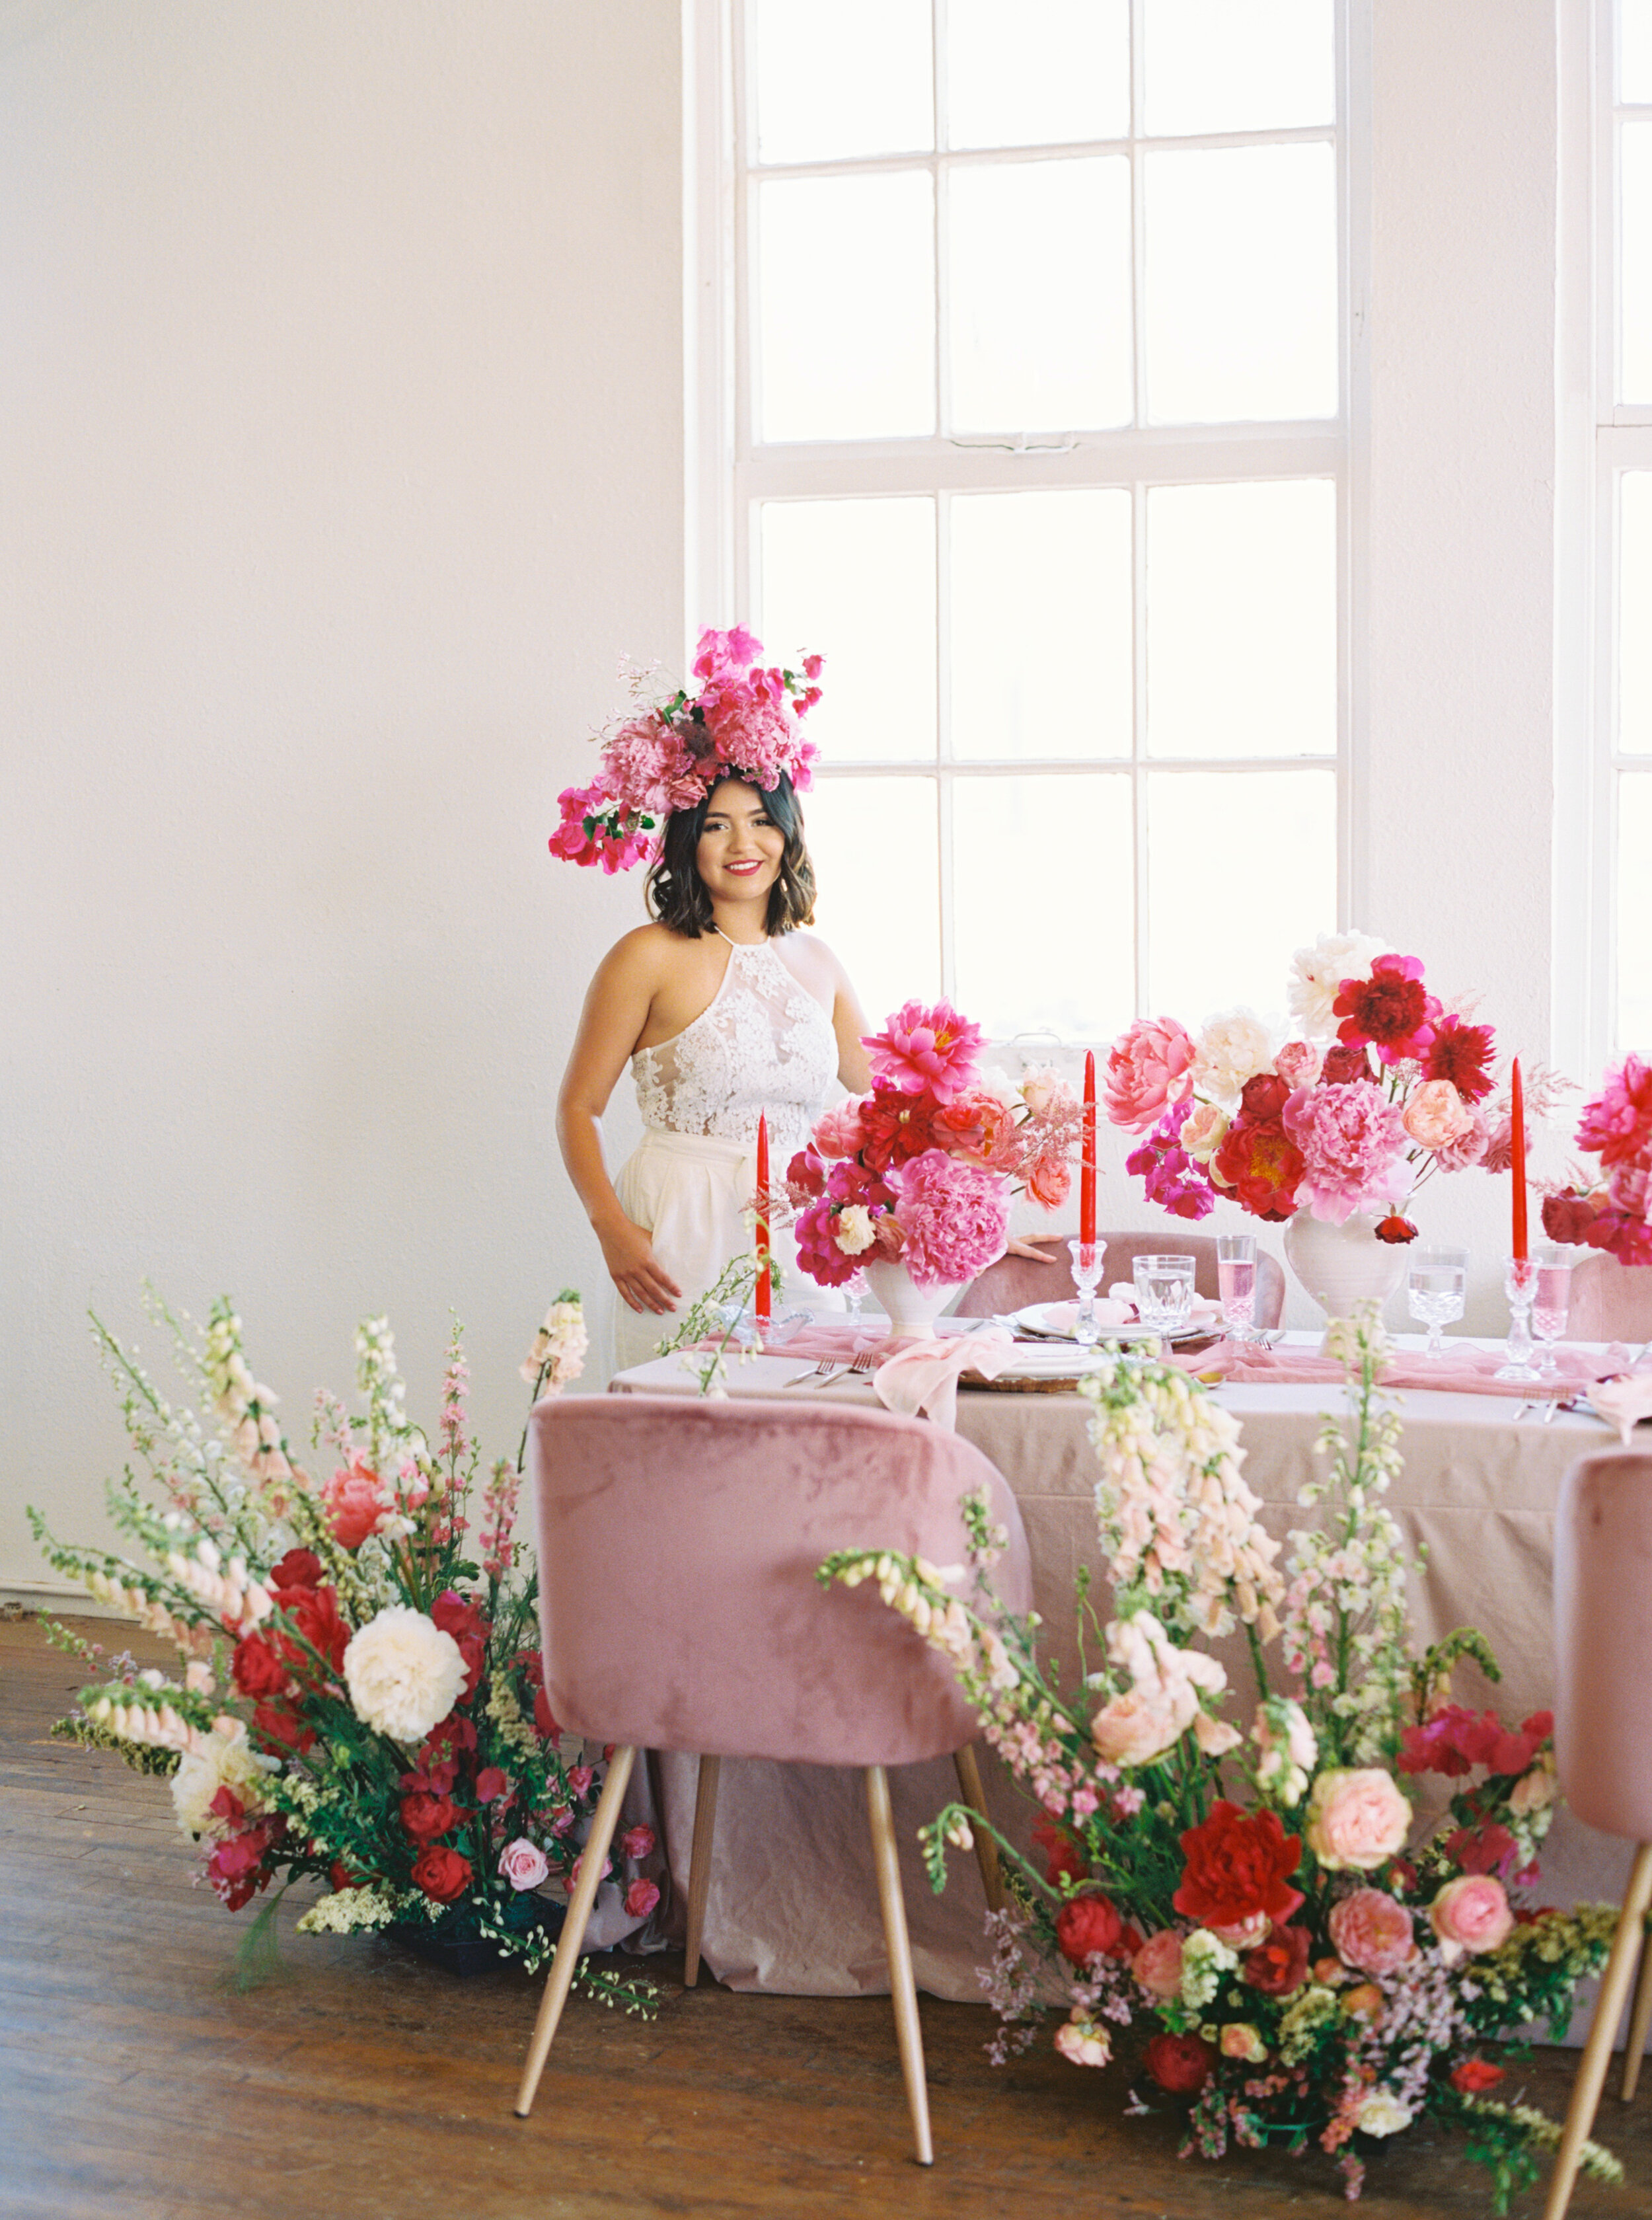 A Romantic Wedding Elopement Filled with Colorful Fuchsia - Sarahi Hadden Submission-21.jpg